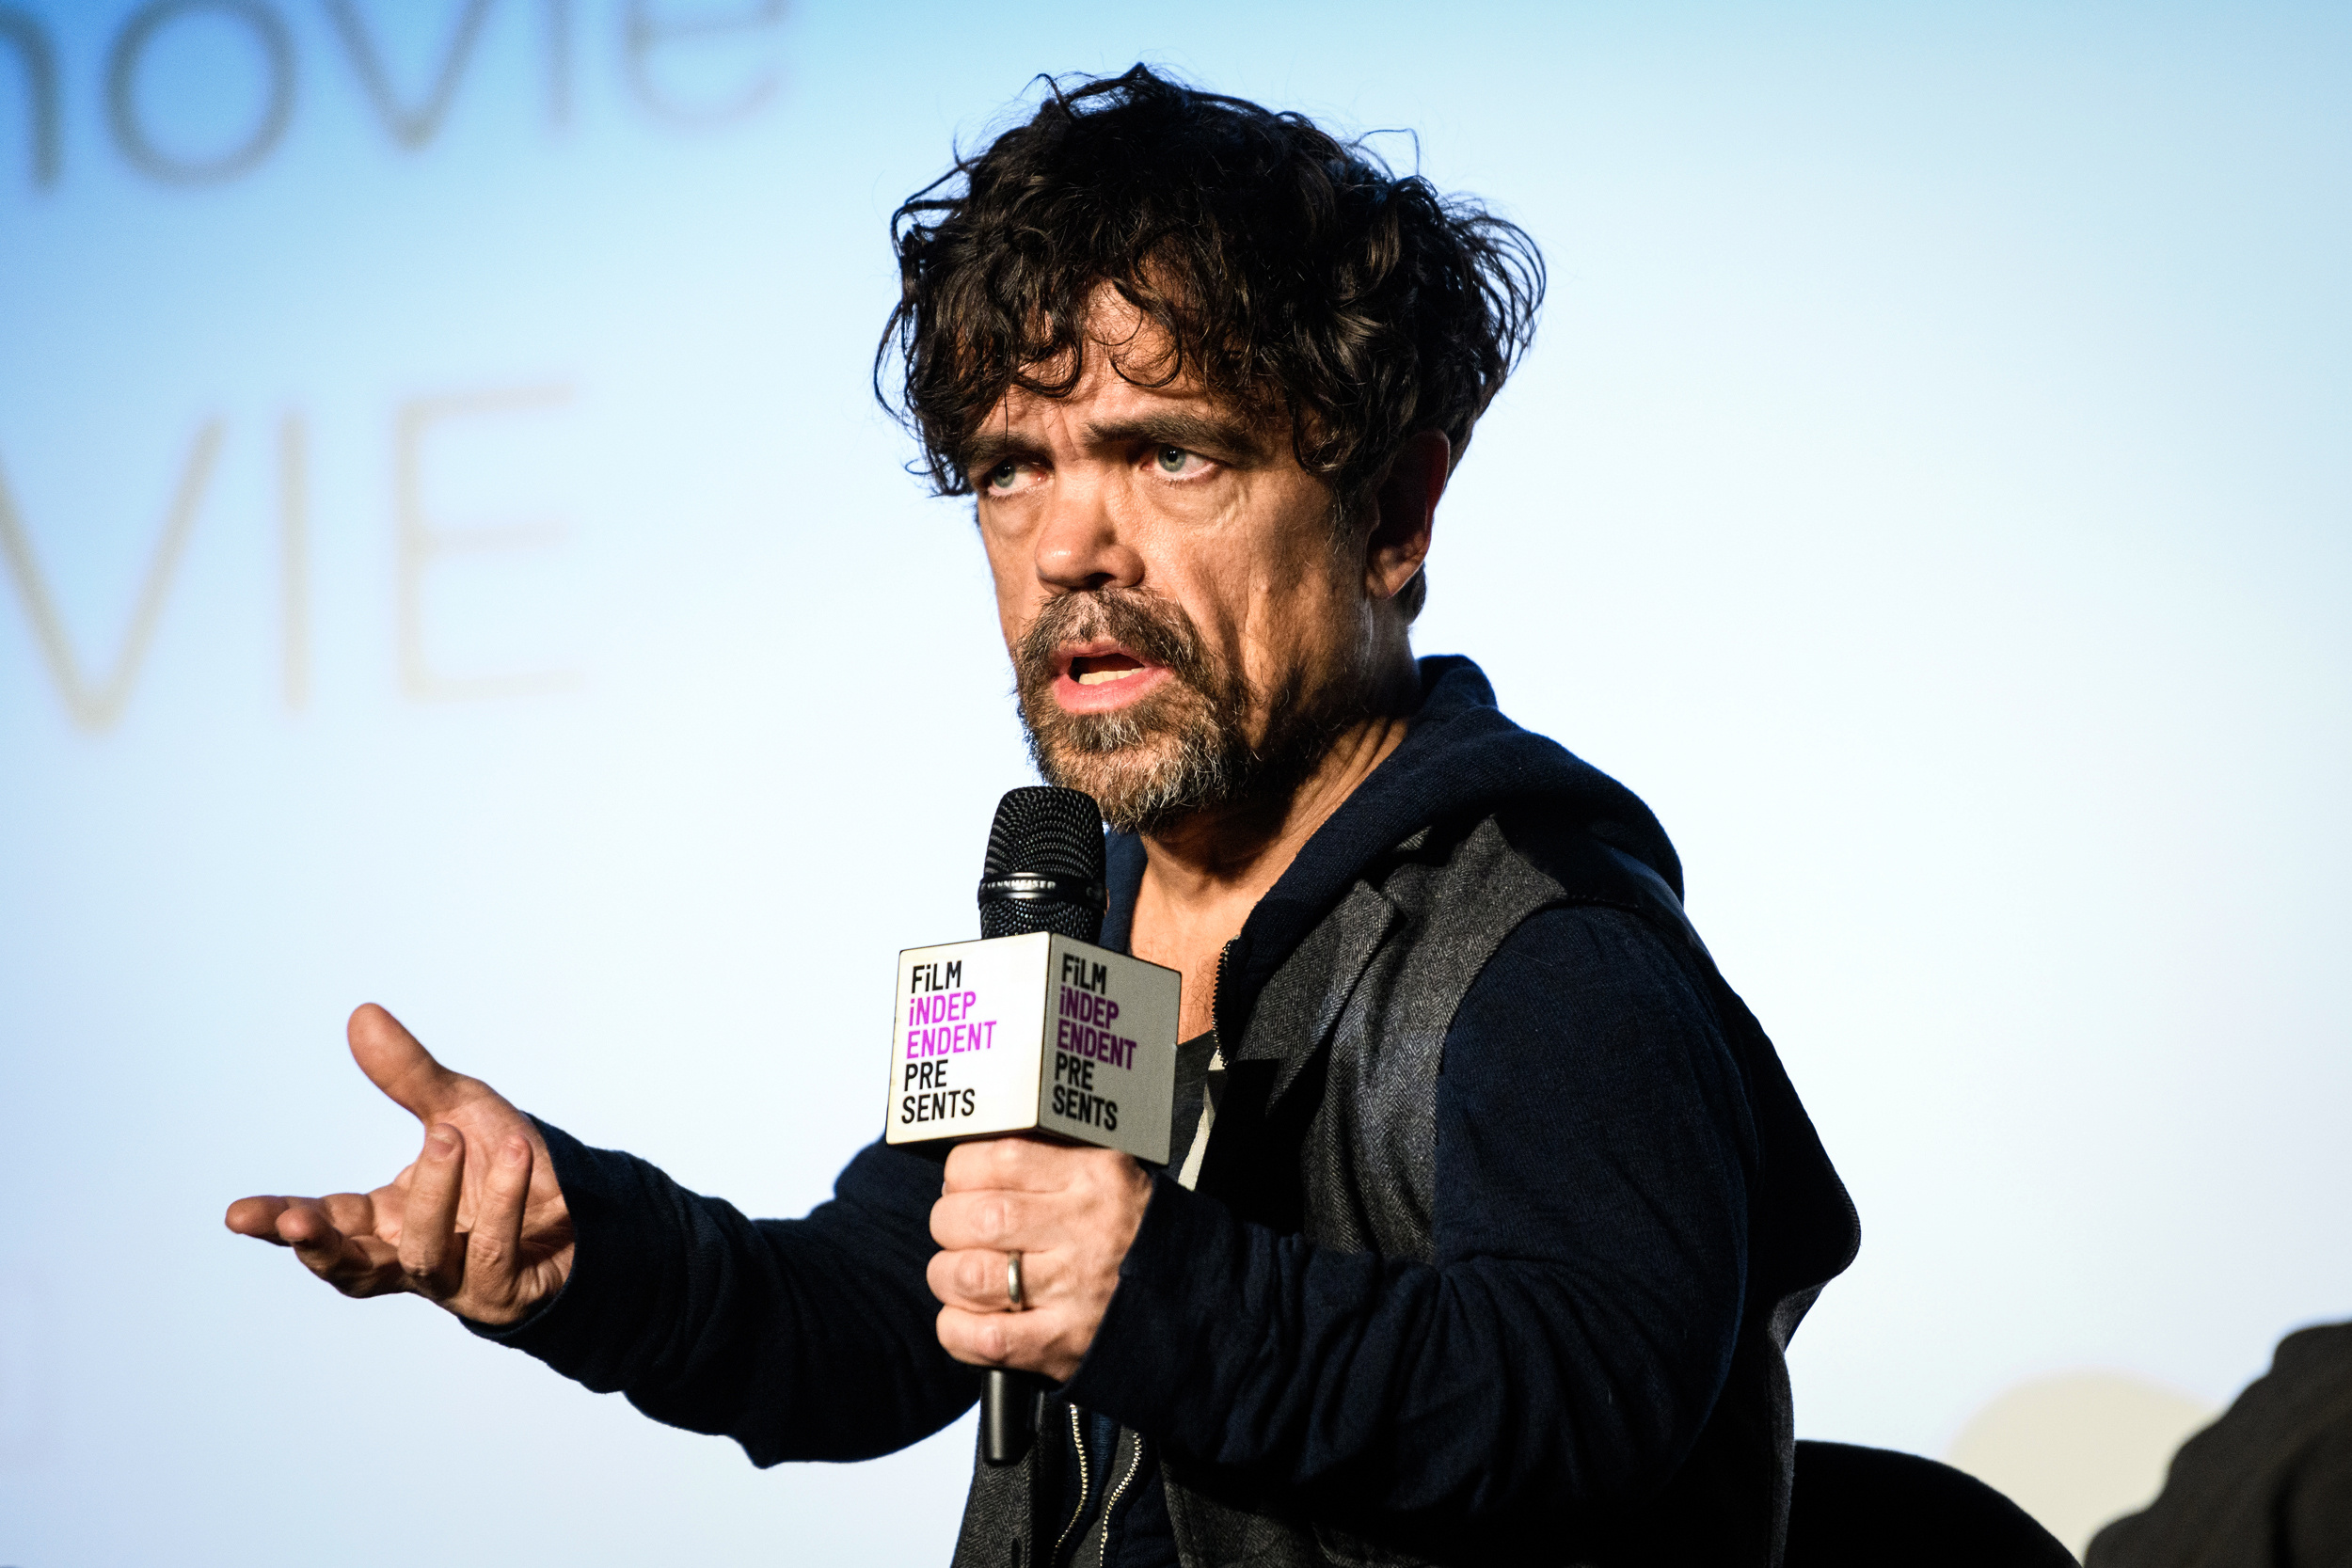 Peter Dinklage movies, Game of Thrones prequel, Highly anticipated, Impressive storytelling, 2500x1670 HD Desktop